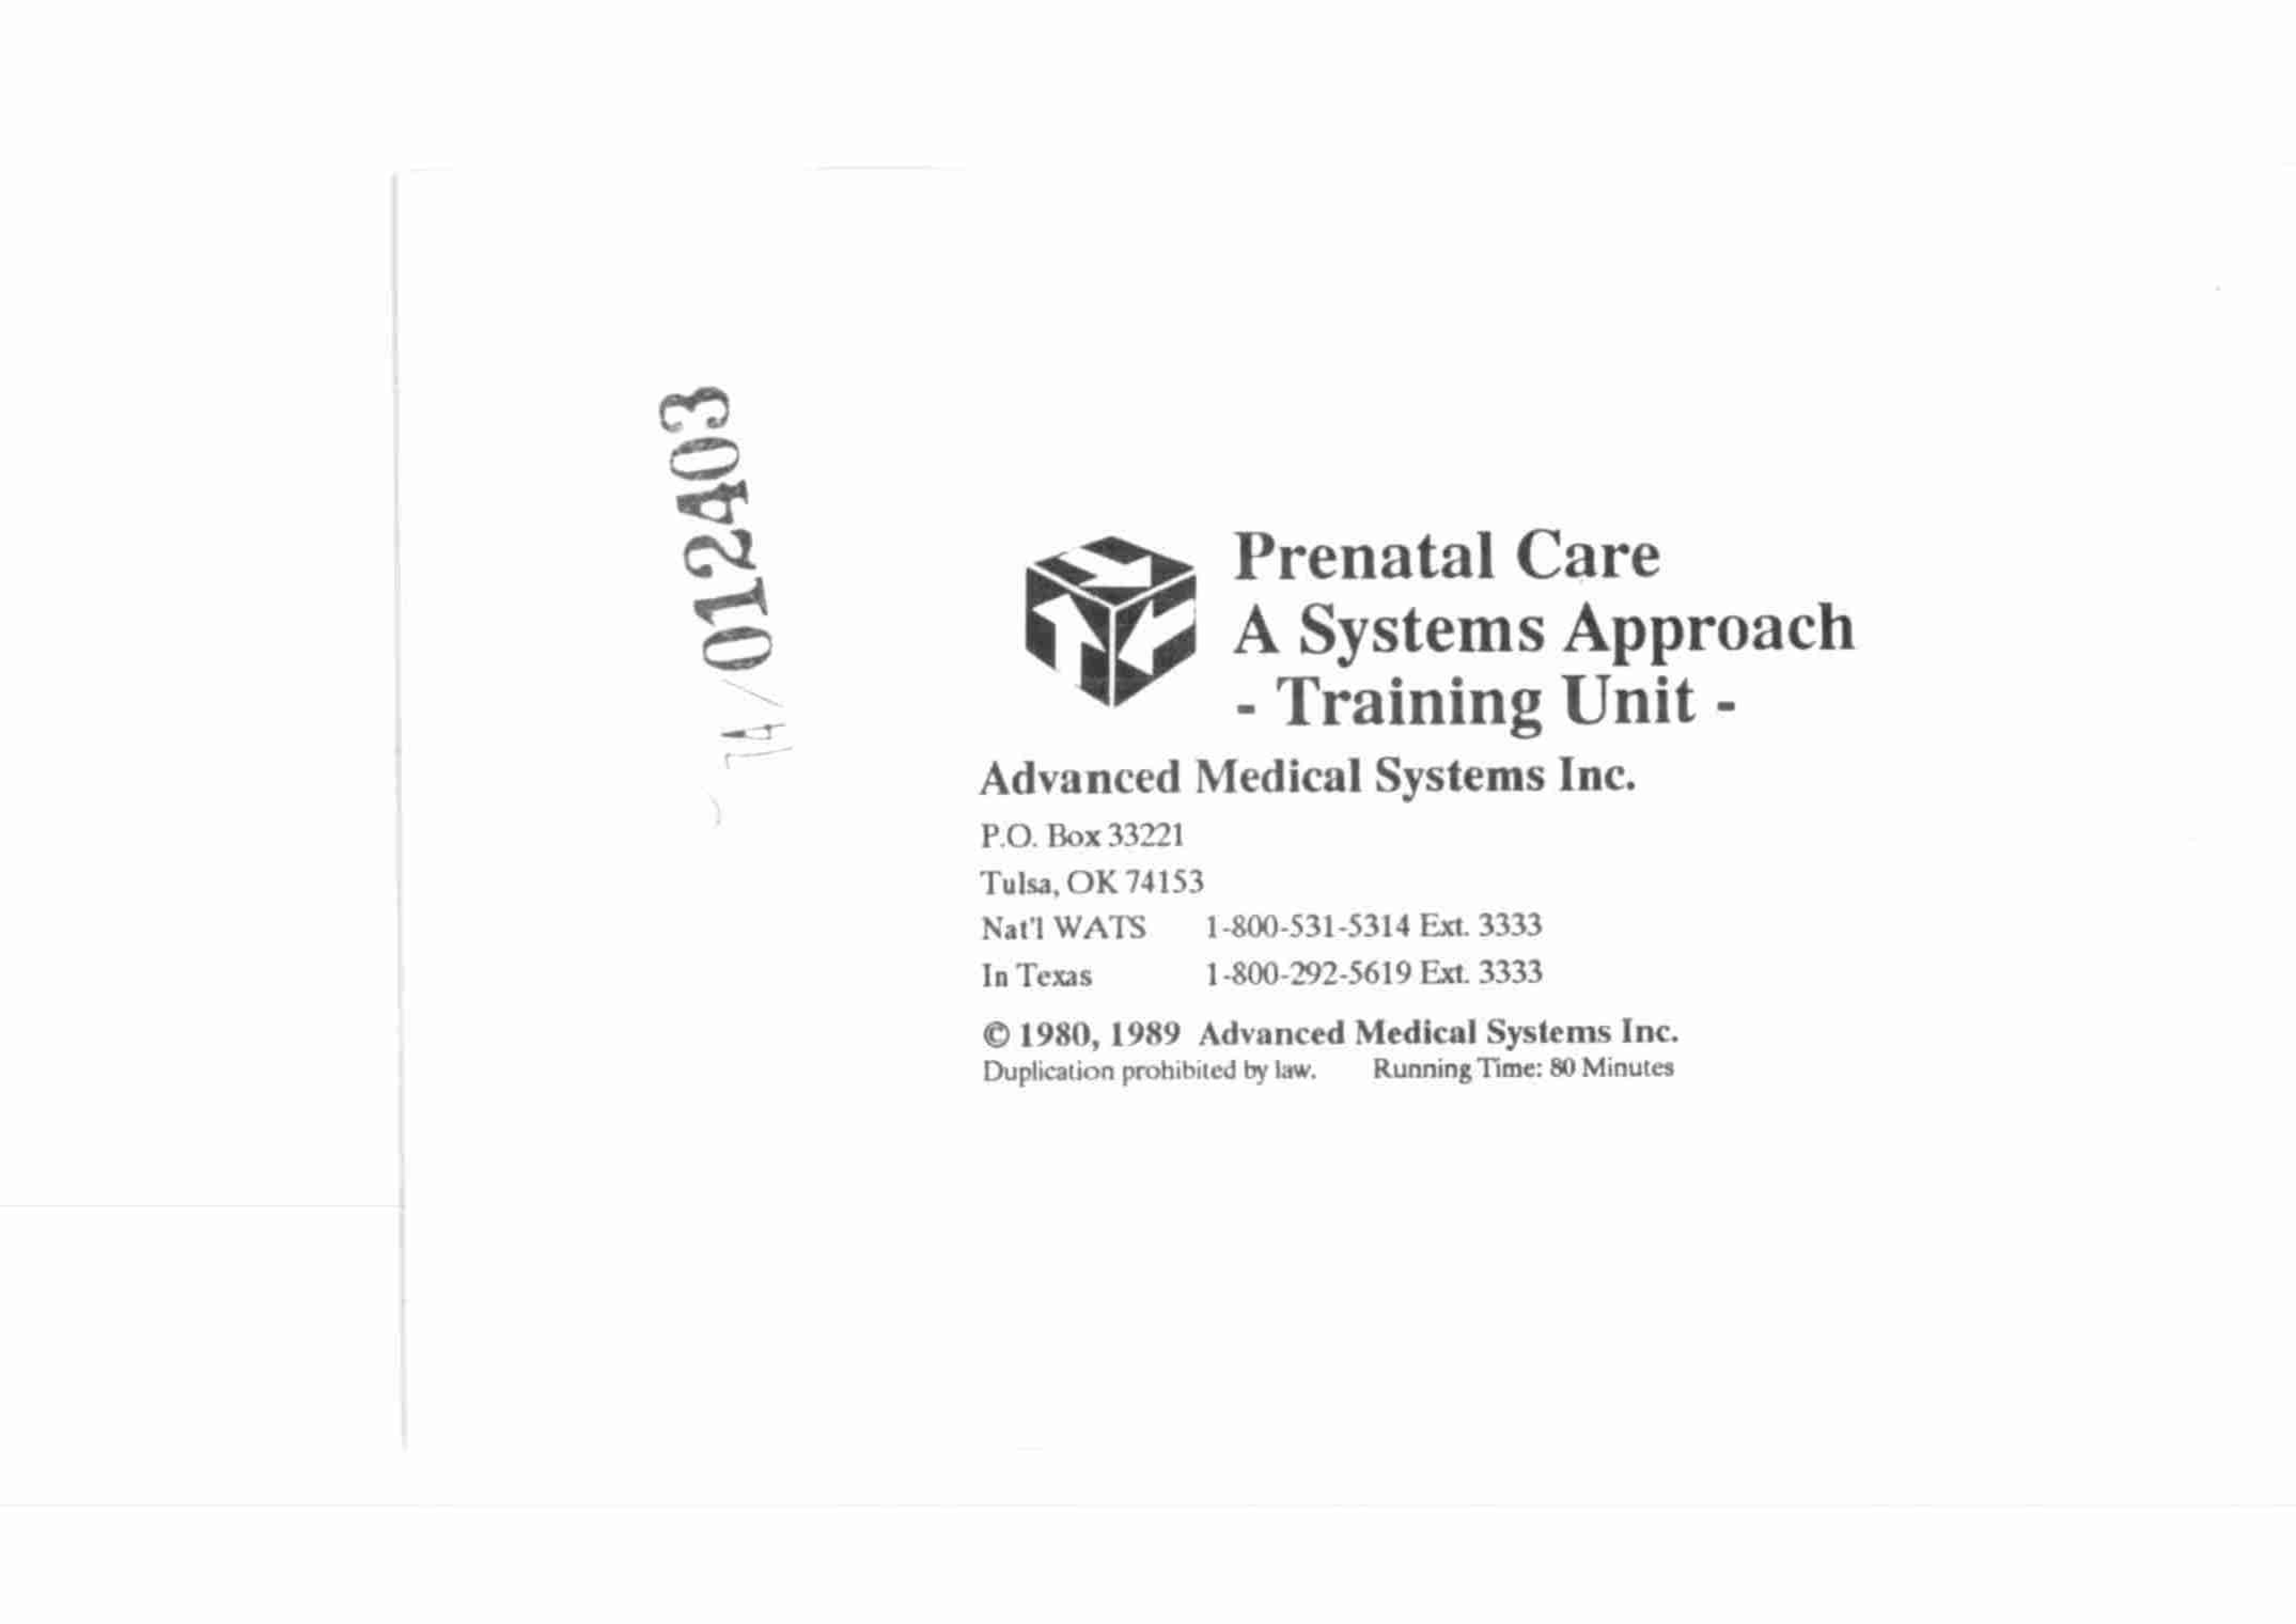  PRENATAL CARE A SYSTEMS APPROACH